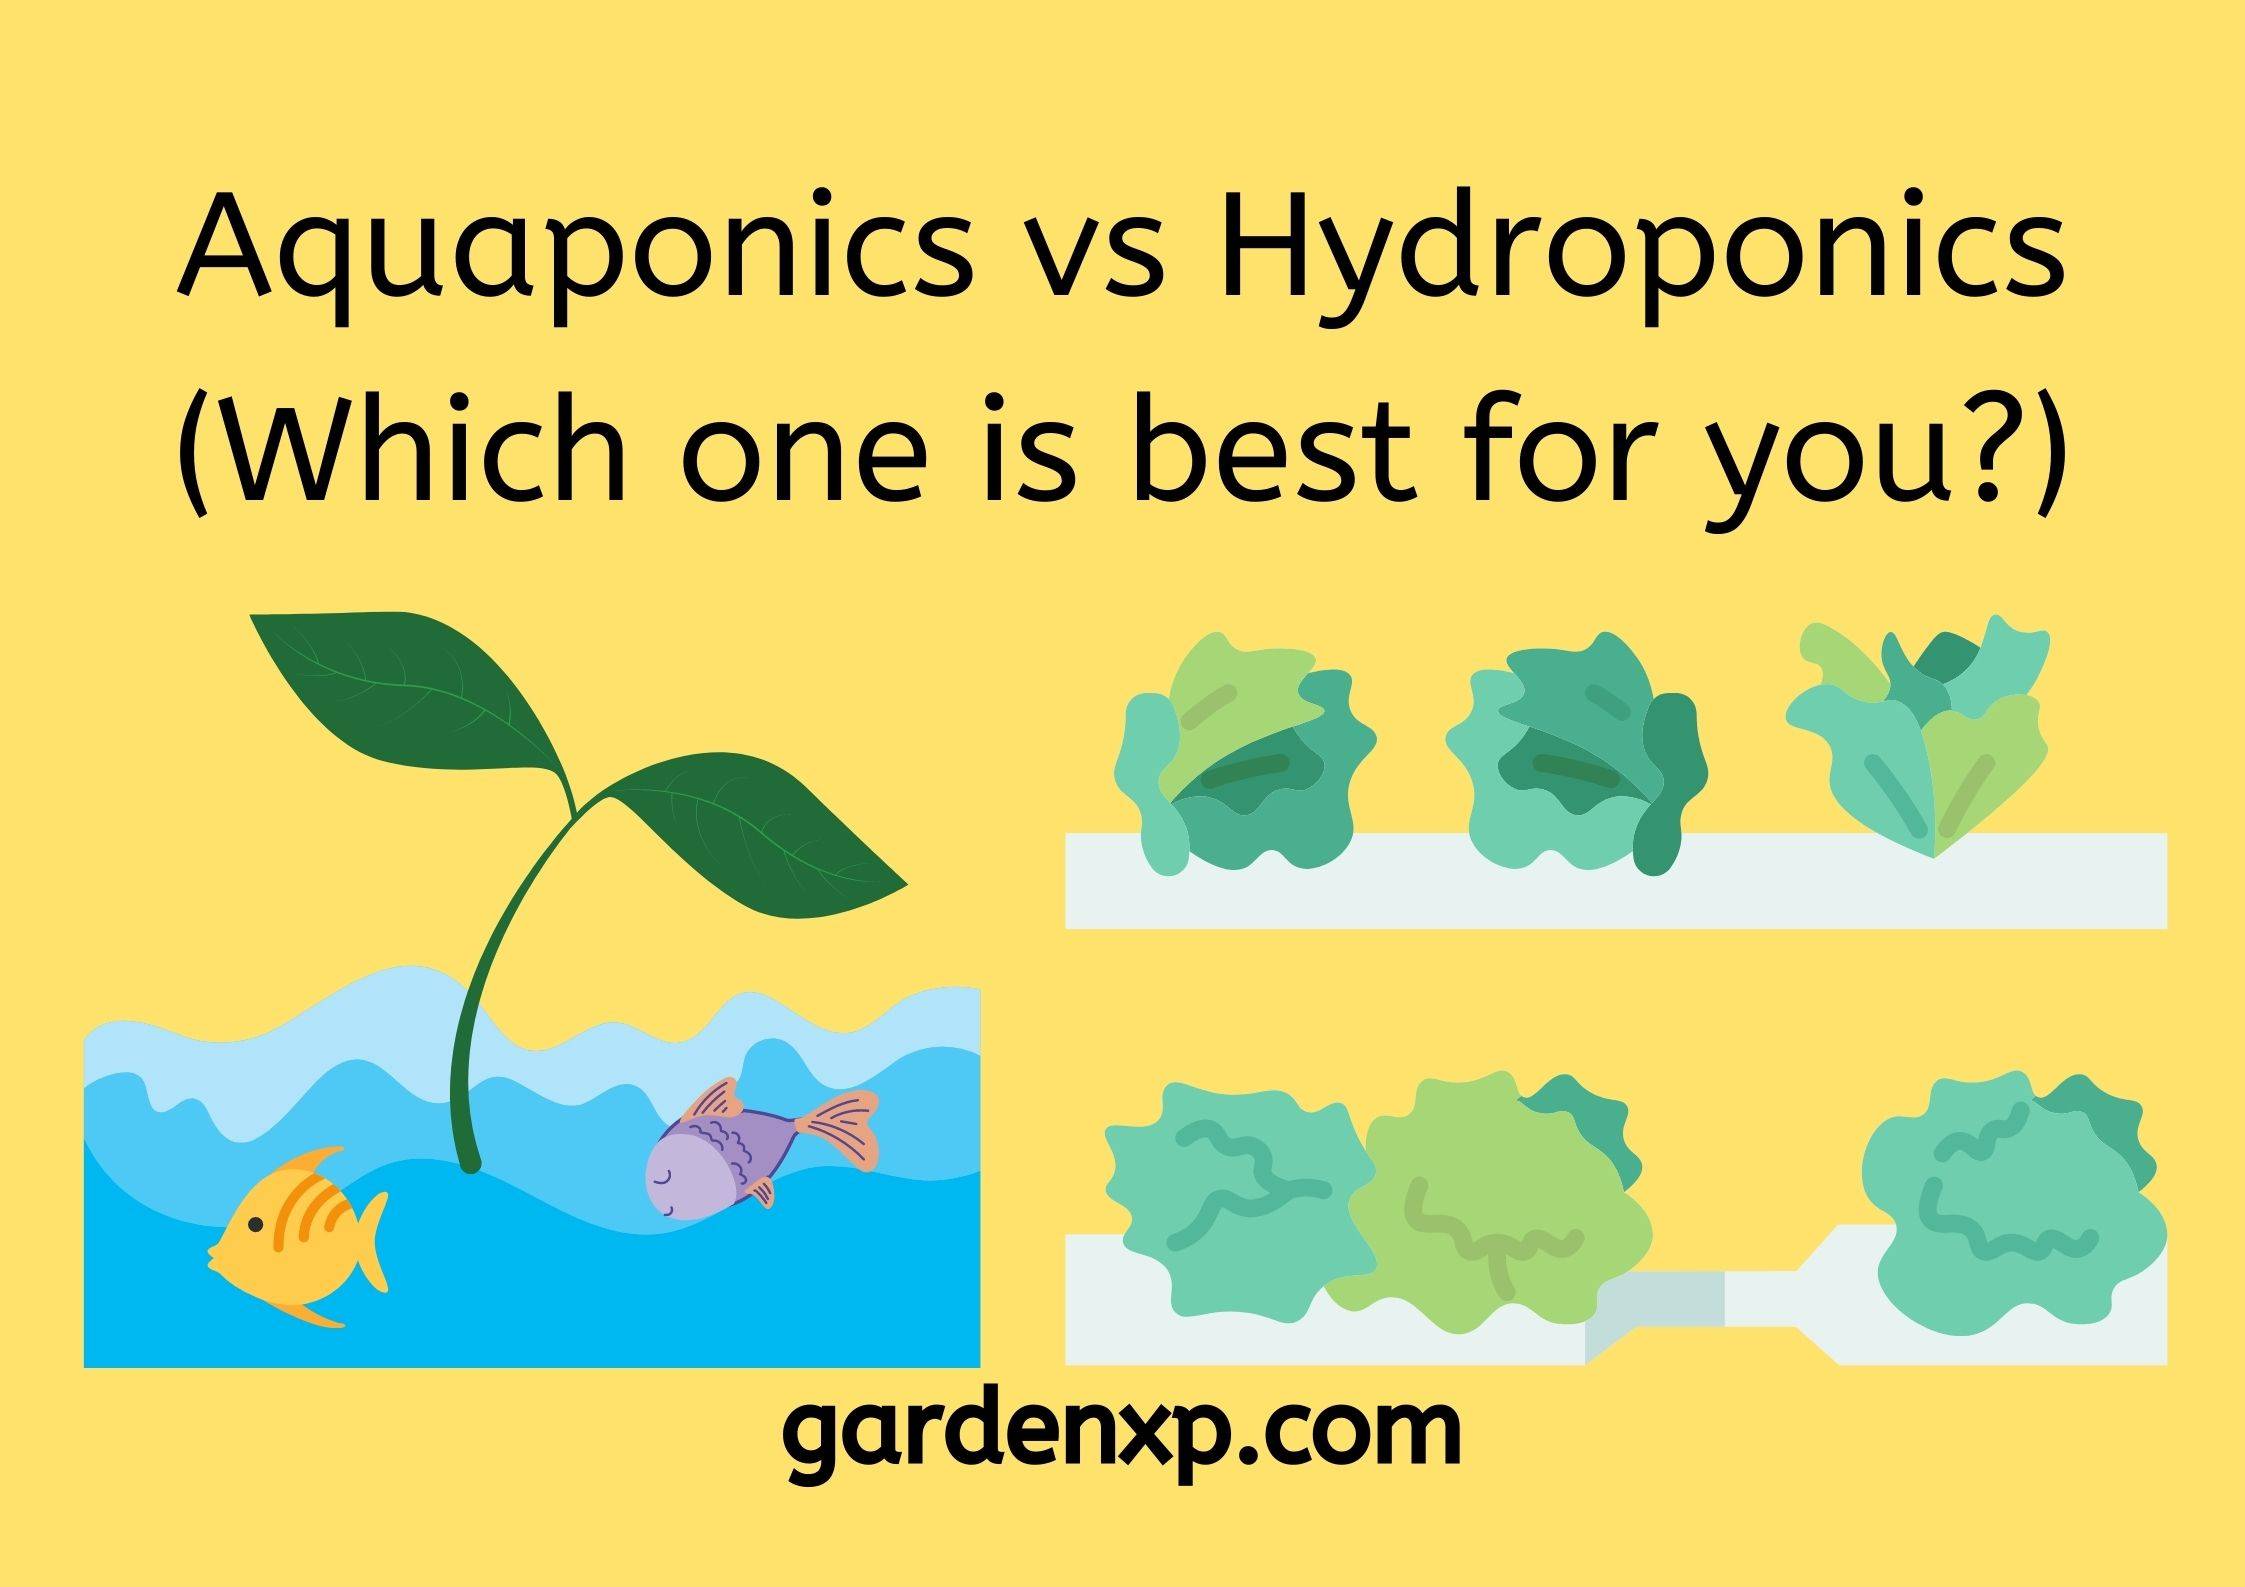 <strong>Aquaponics vs Hydroponics (Which one is best for you?)</strong>